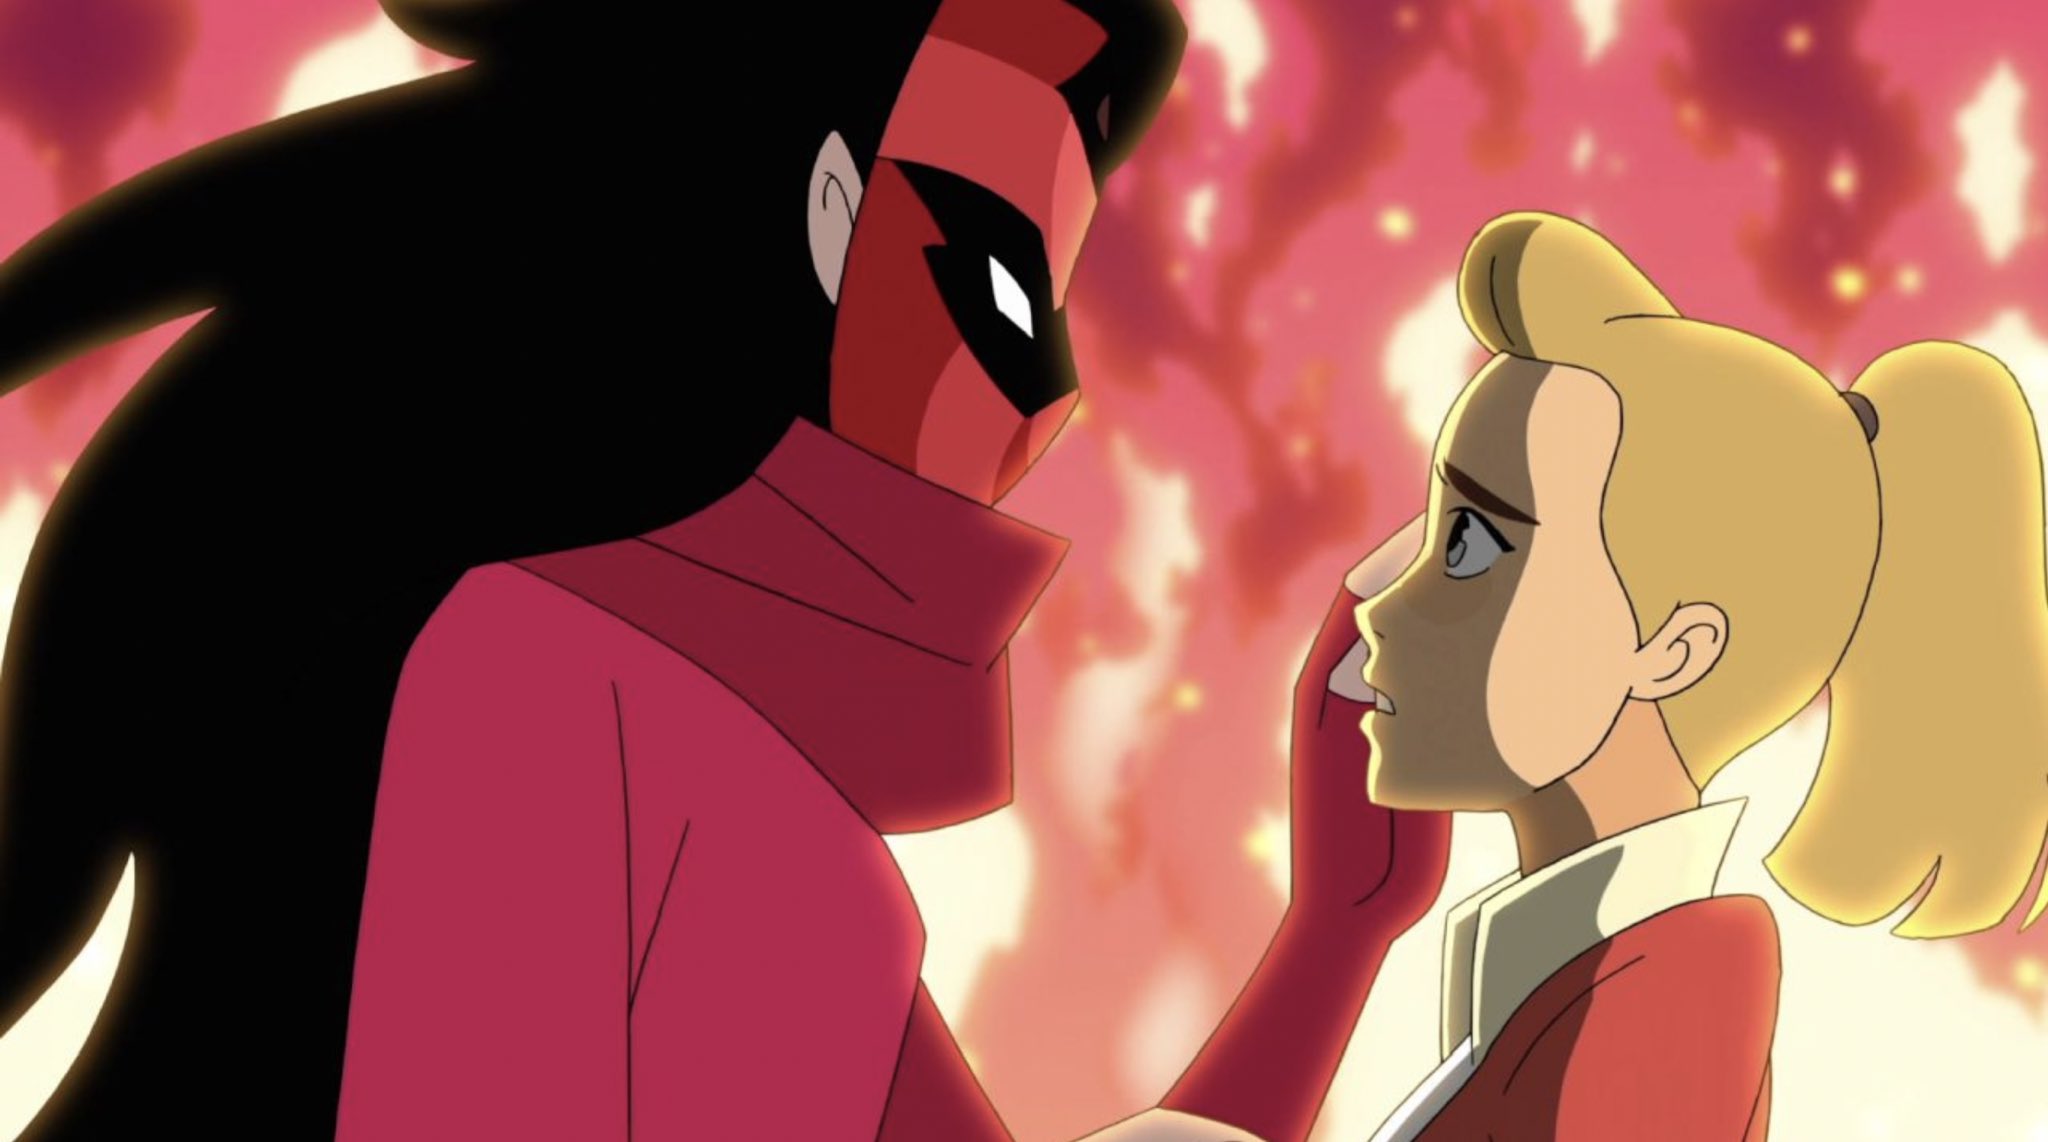 182. in this scene, in the spanish dub shadow weaver says "if you love...